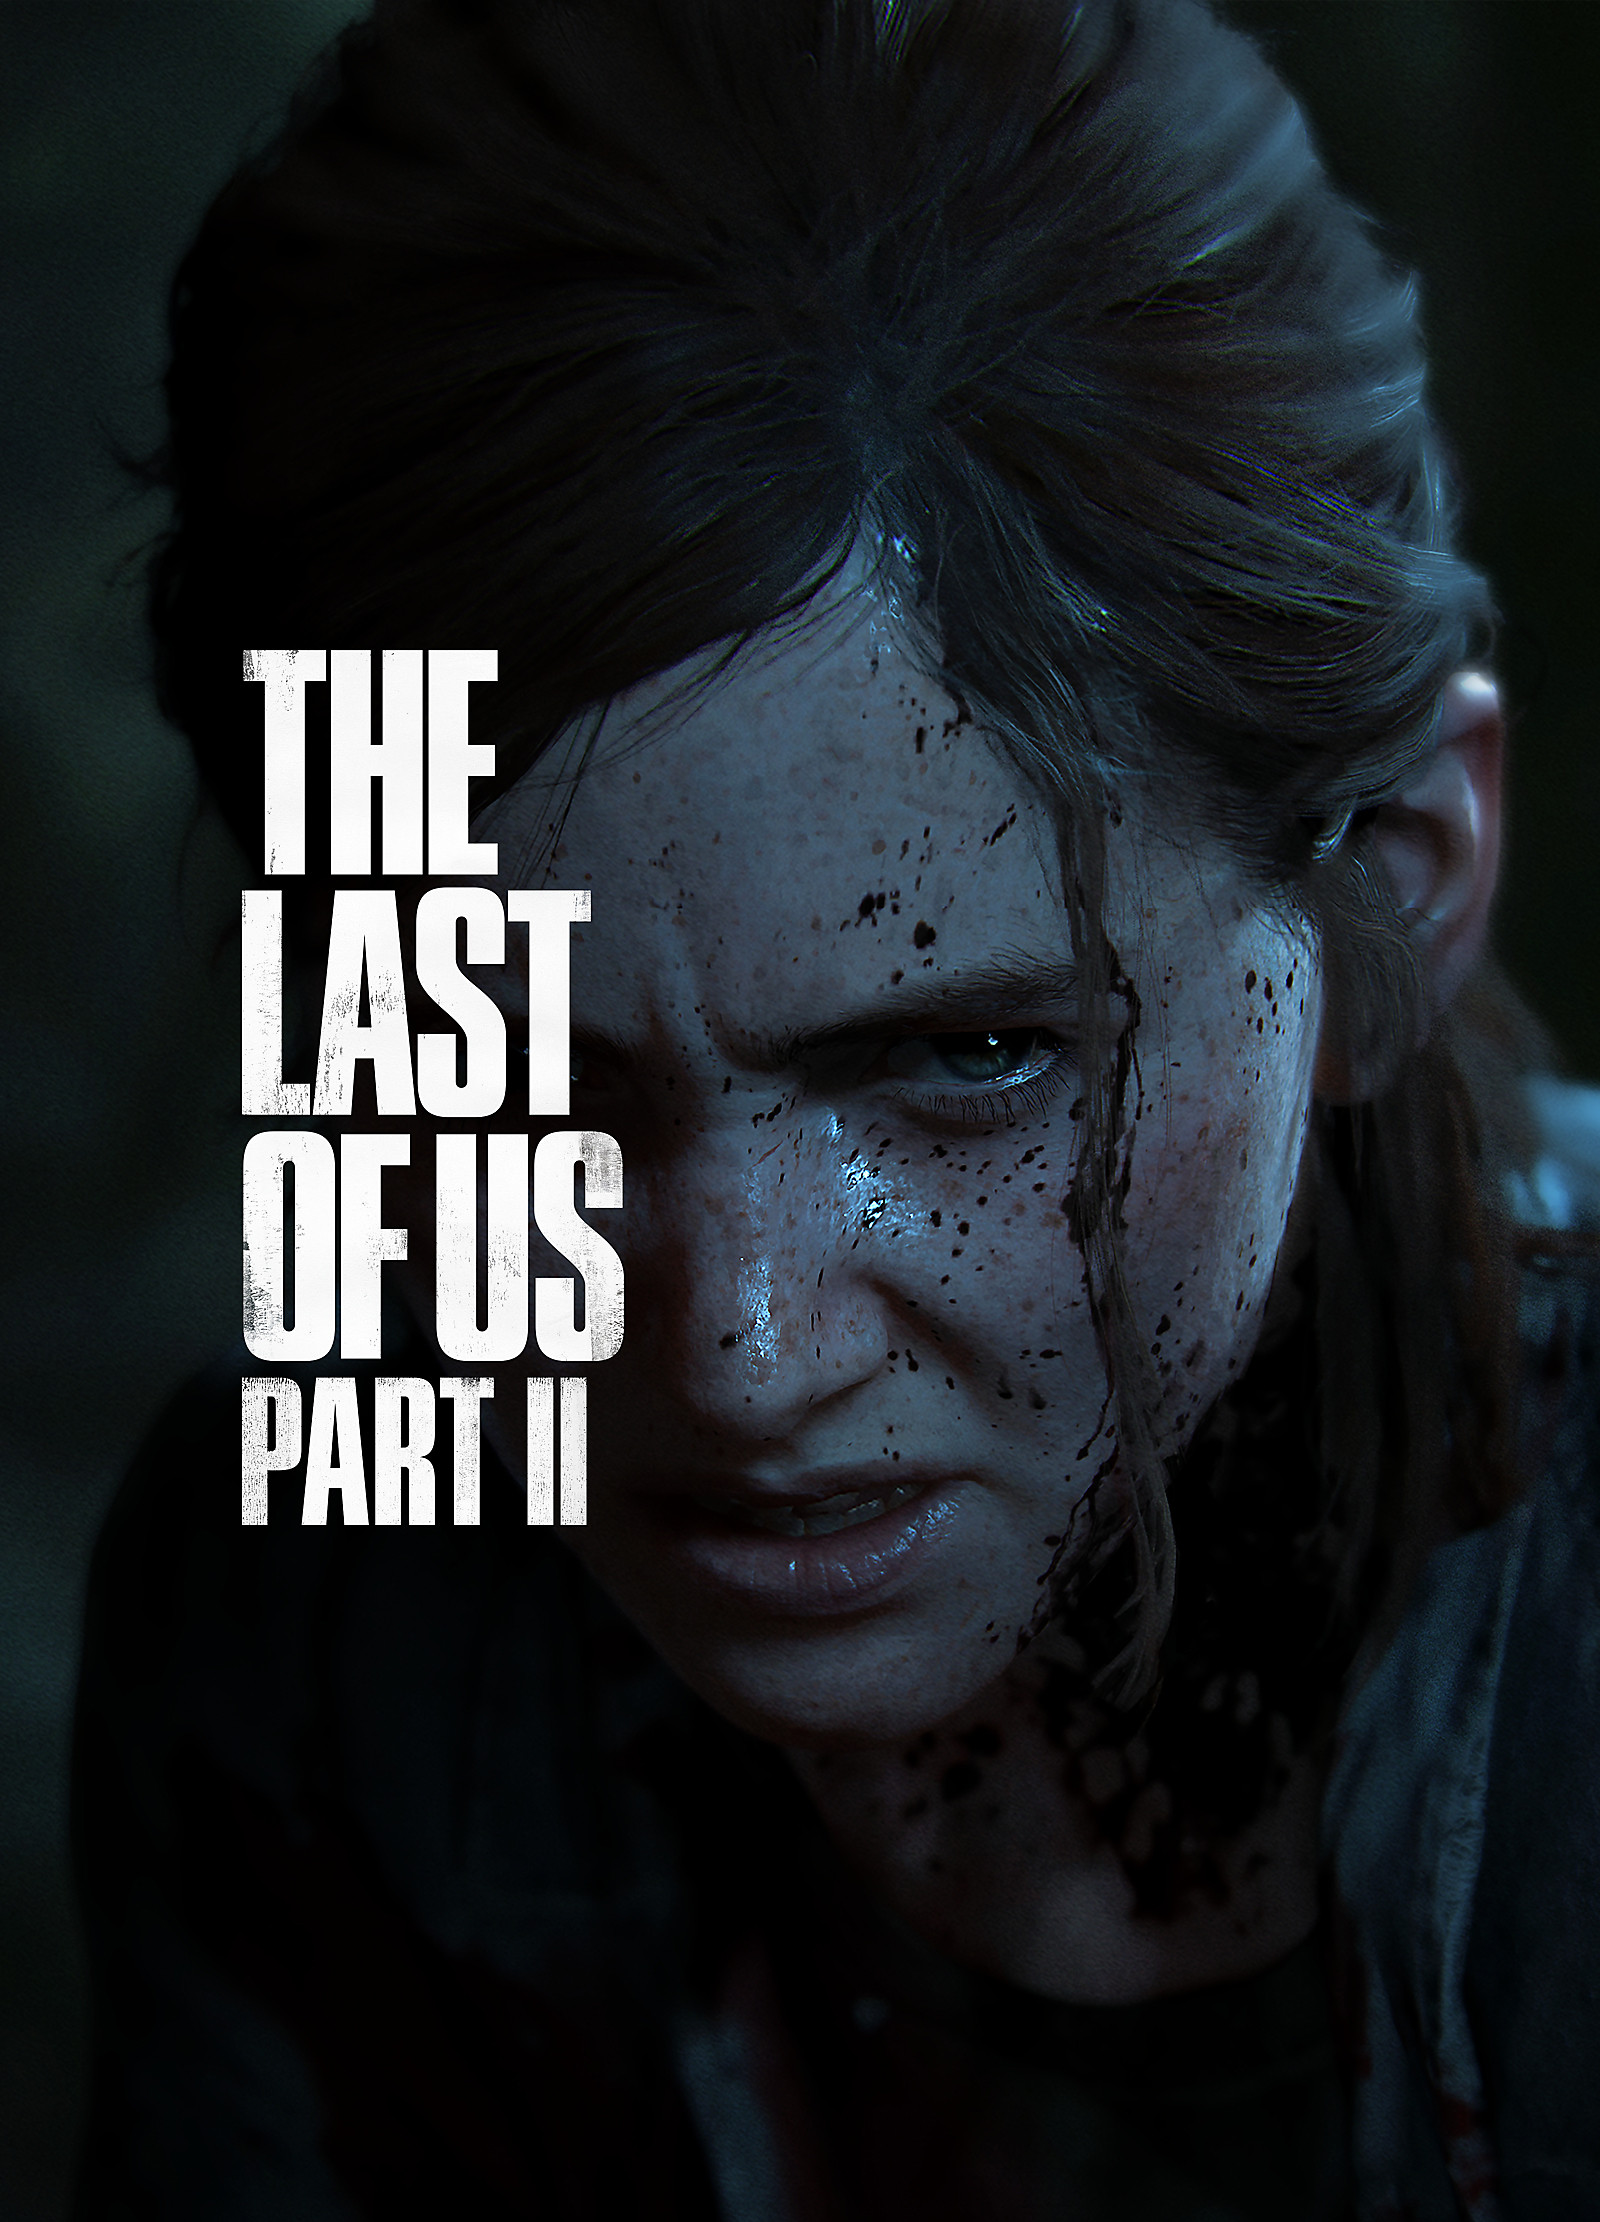 The Last of Us Part II Game | PS4 - PlayStation